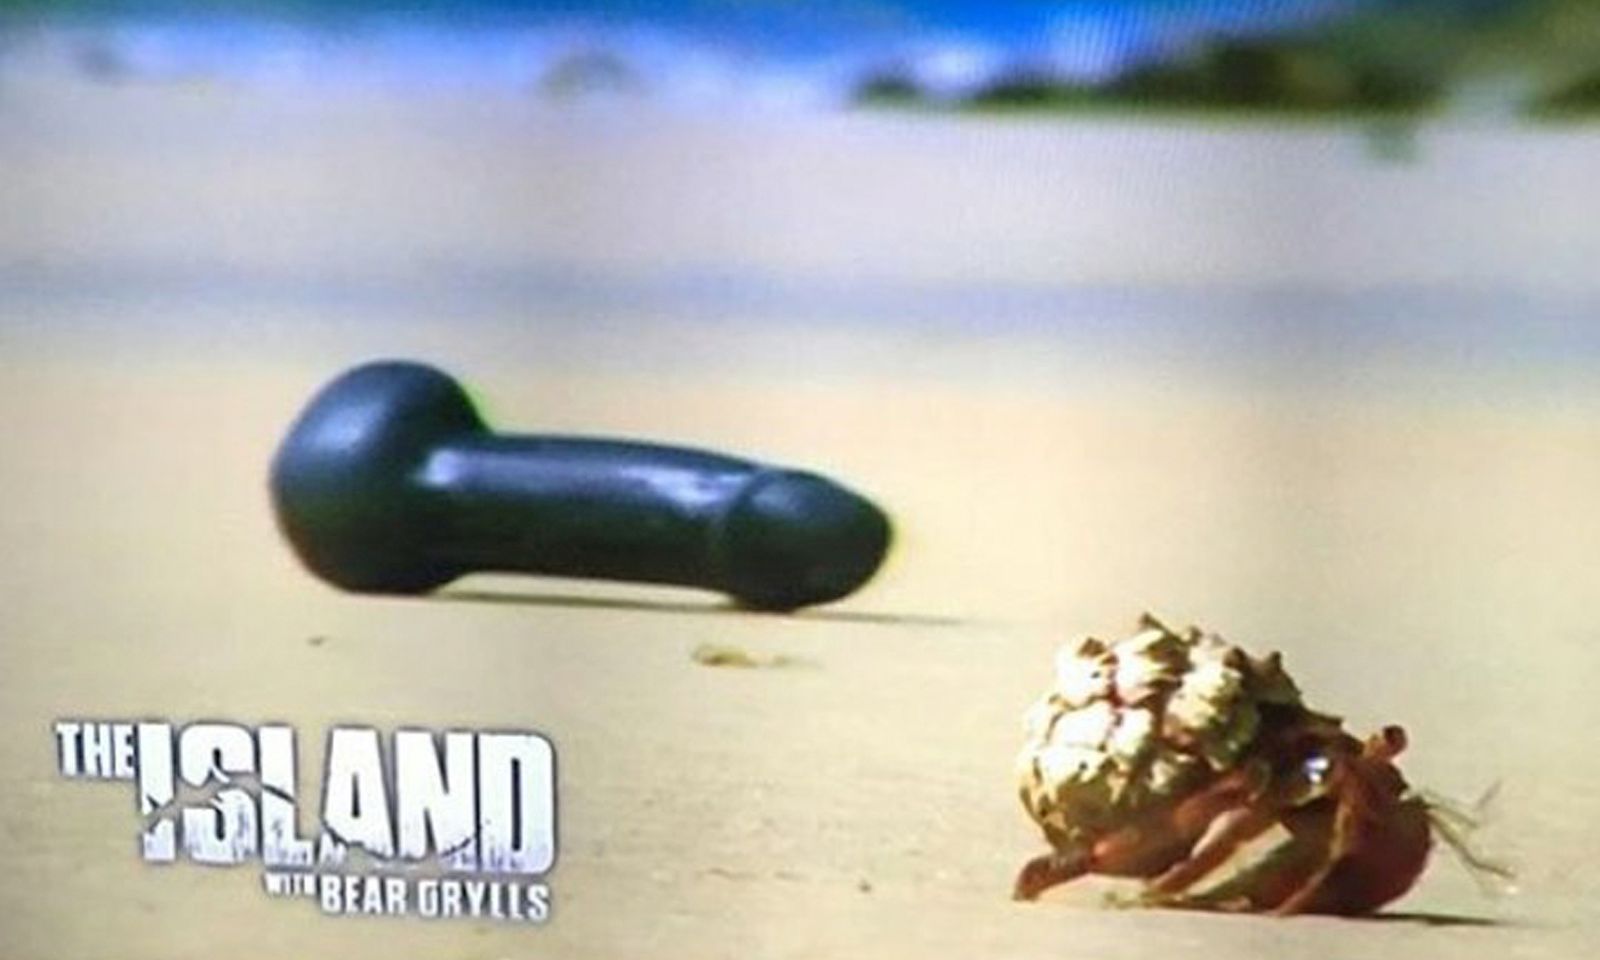 Dildo Makes Guest Appearance on ‘The Island With Bear Grylls’